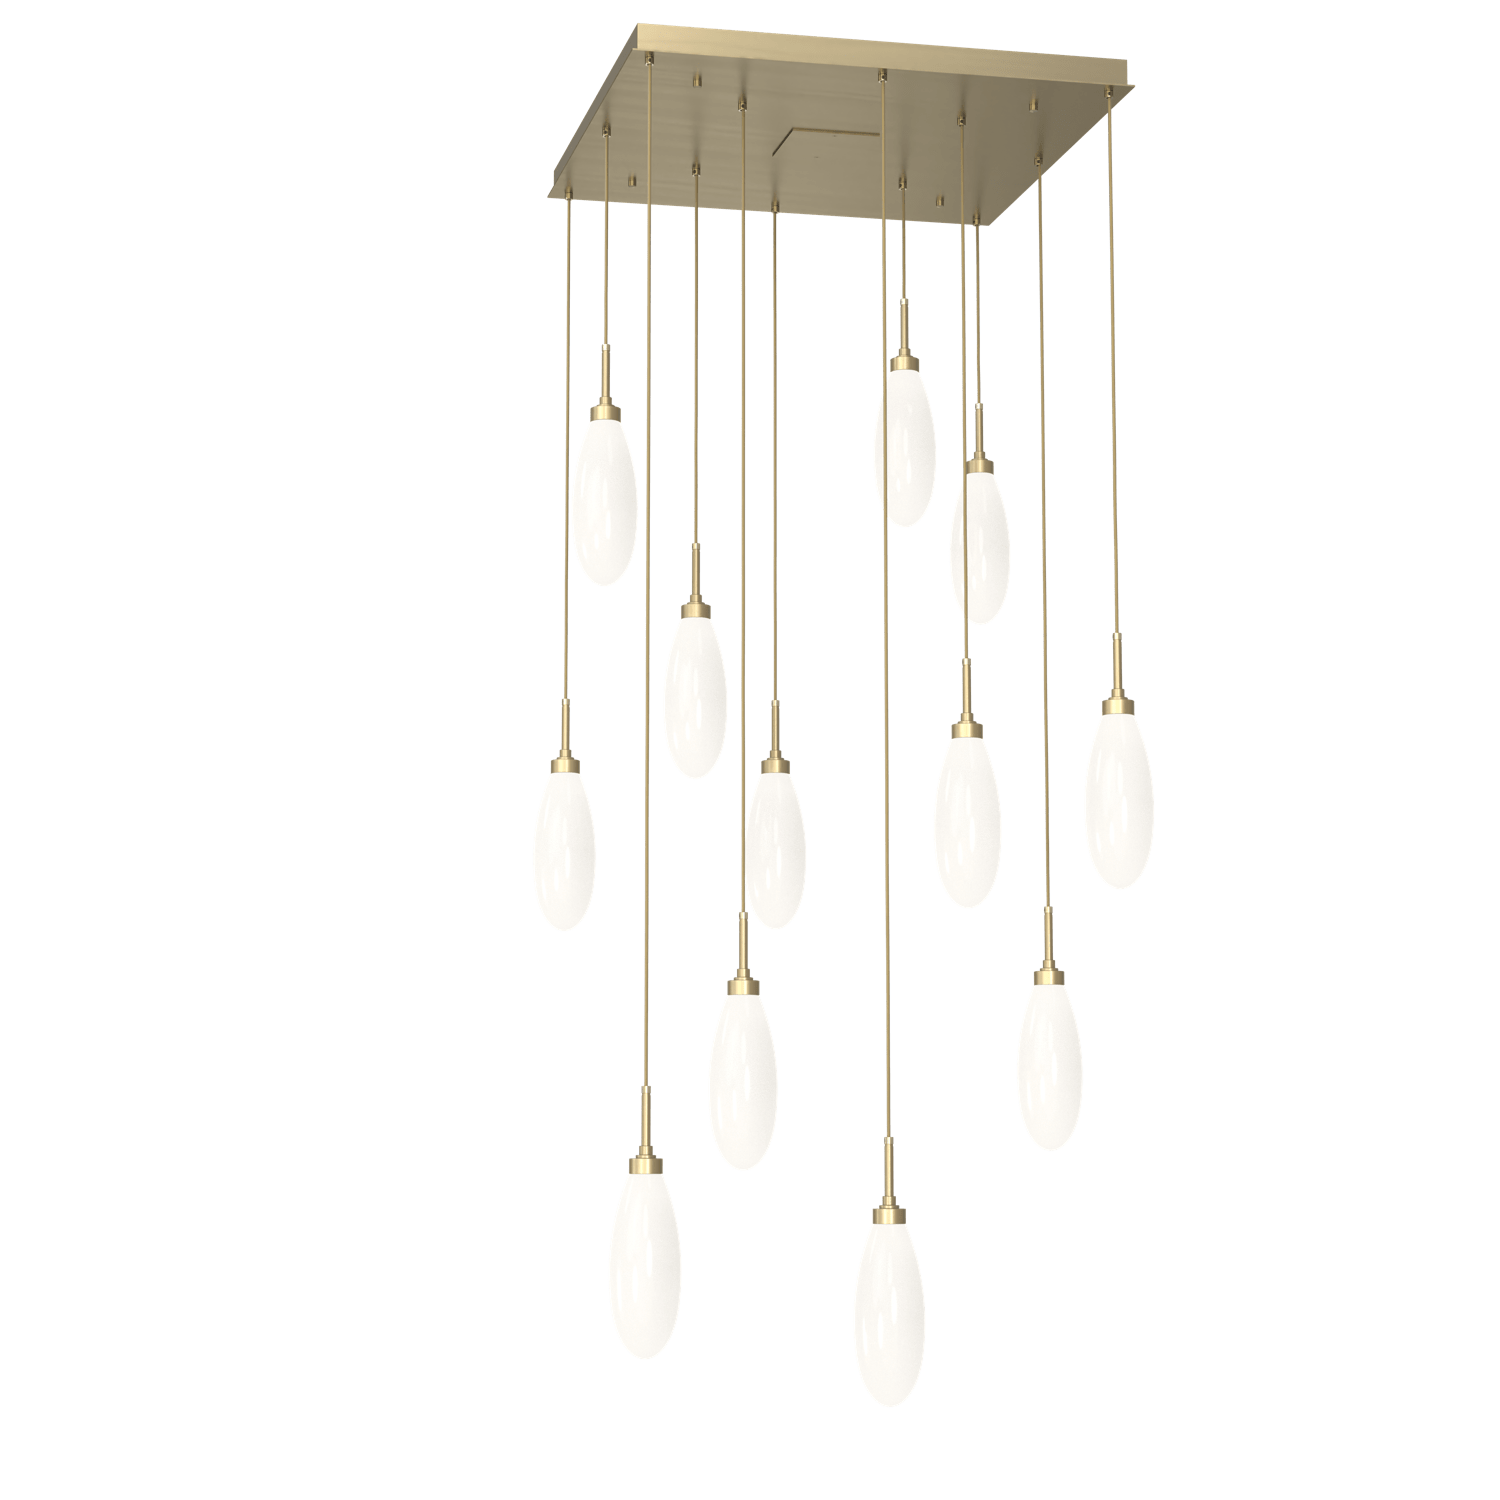 CHB0071-12-HB-WL-LL-Hammerton-Studio-Fiori-12-light-square-pendant-chandelier-with-heritage-brass-finish-and-opal-white-glass-shades-and-LED-lamping